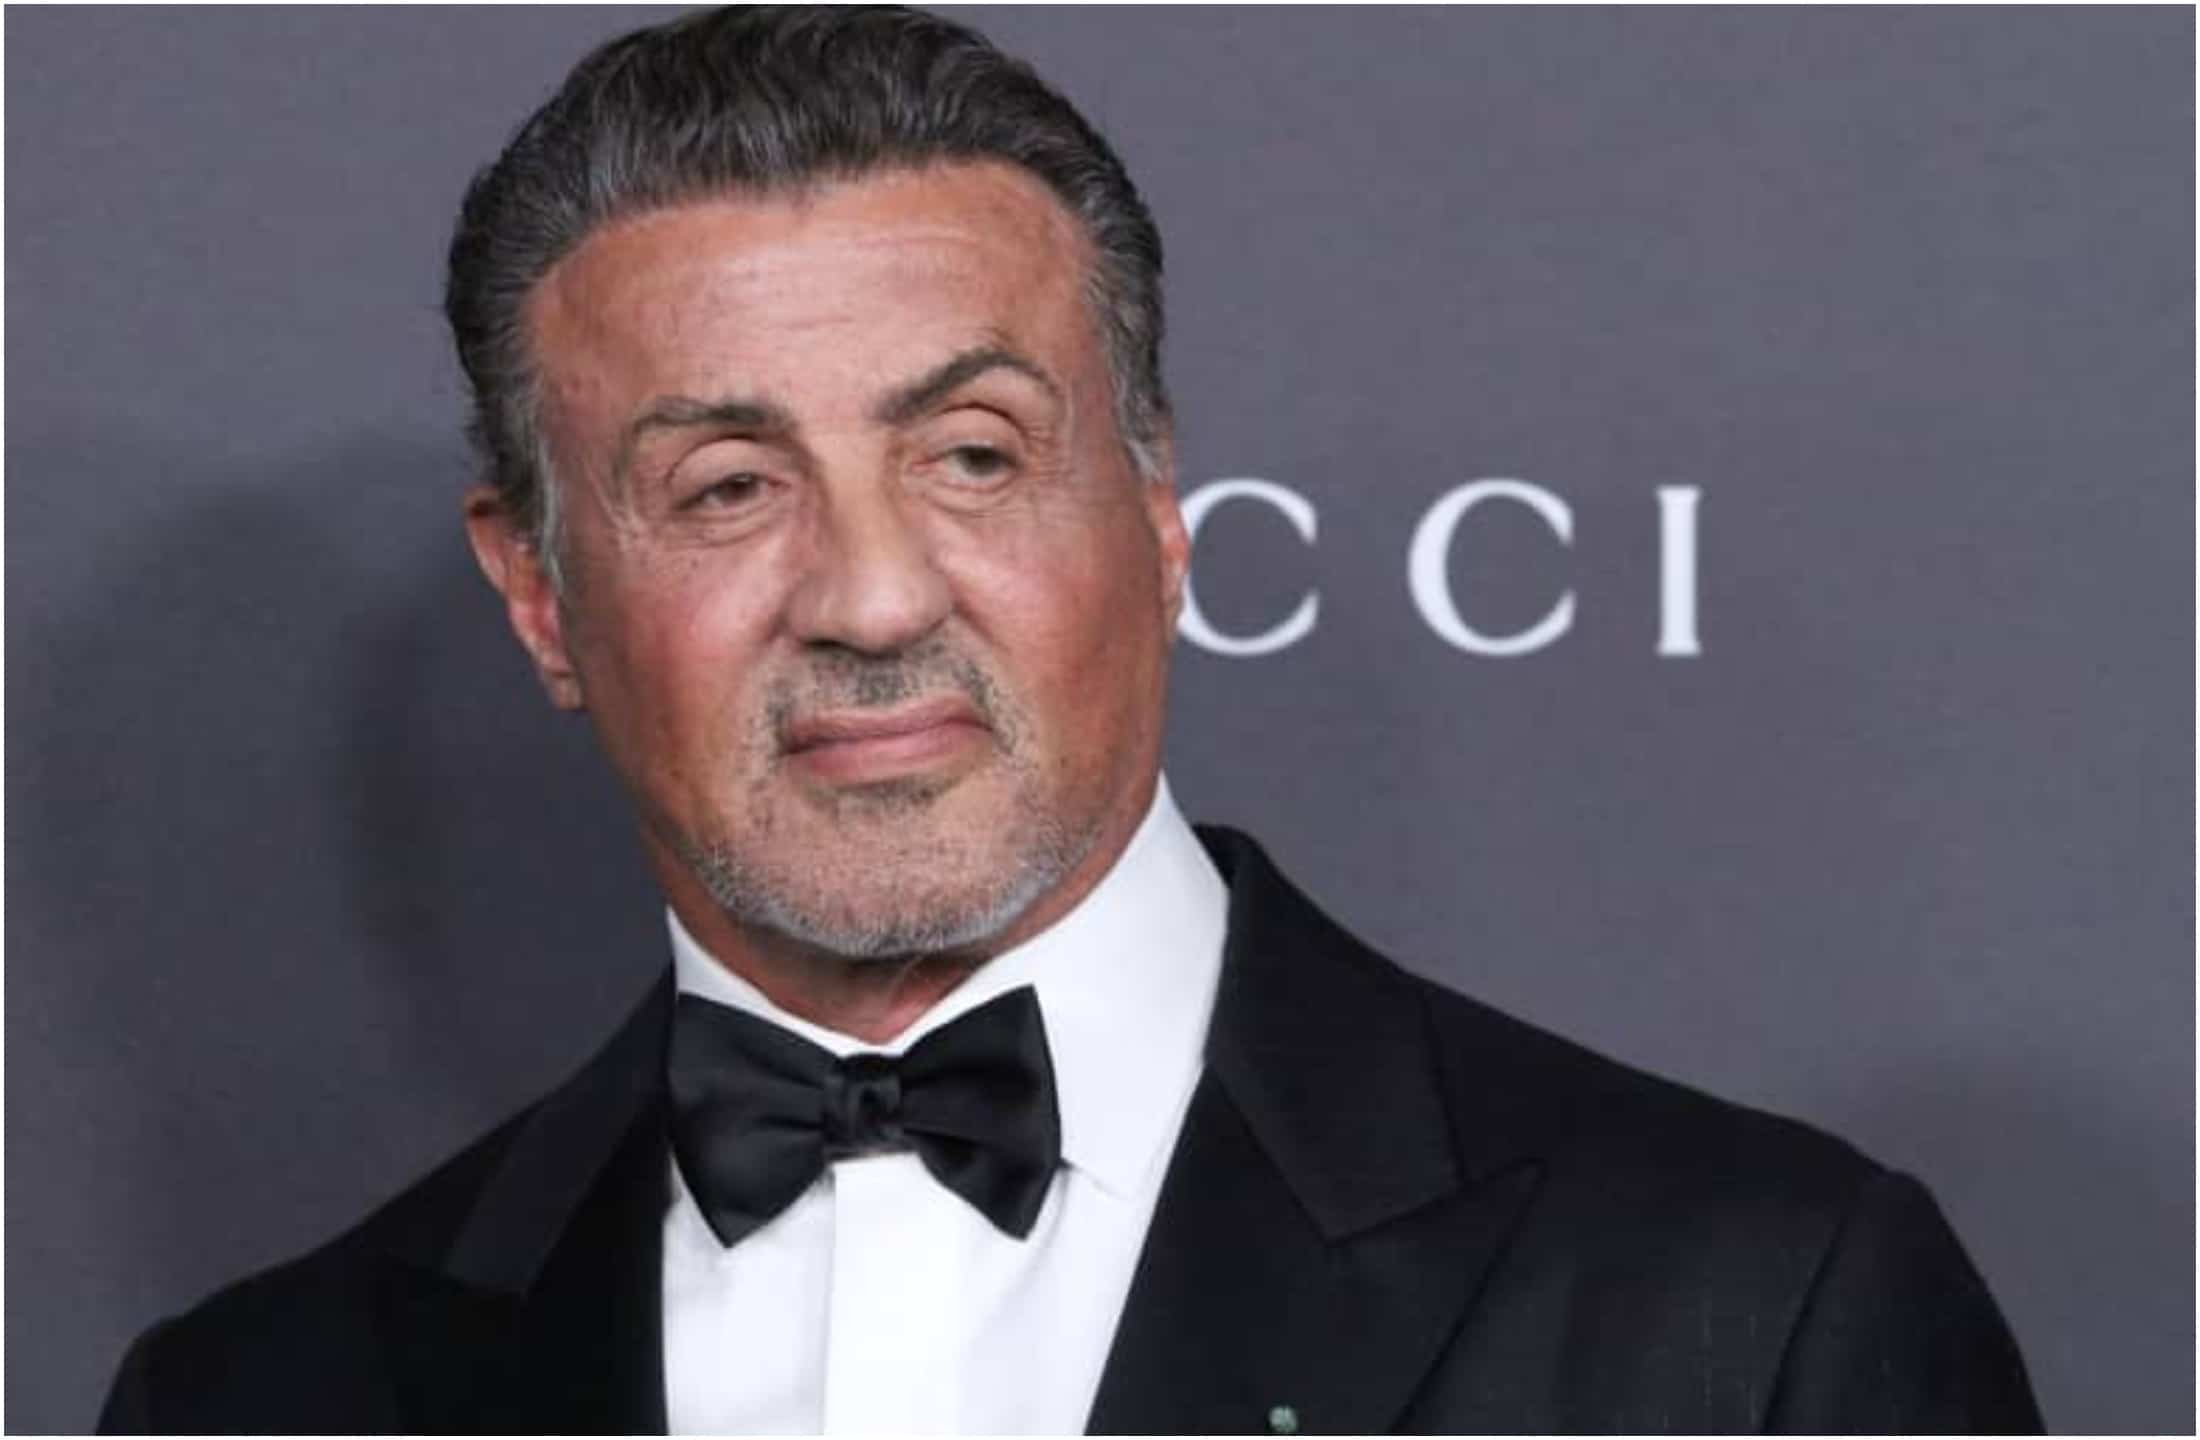 Sylvester Stallone bio age, height, Weight, net worth, career, wiki